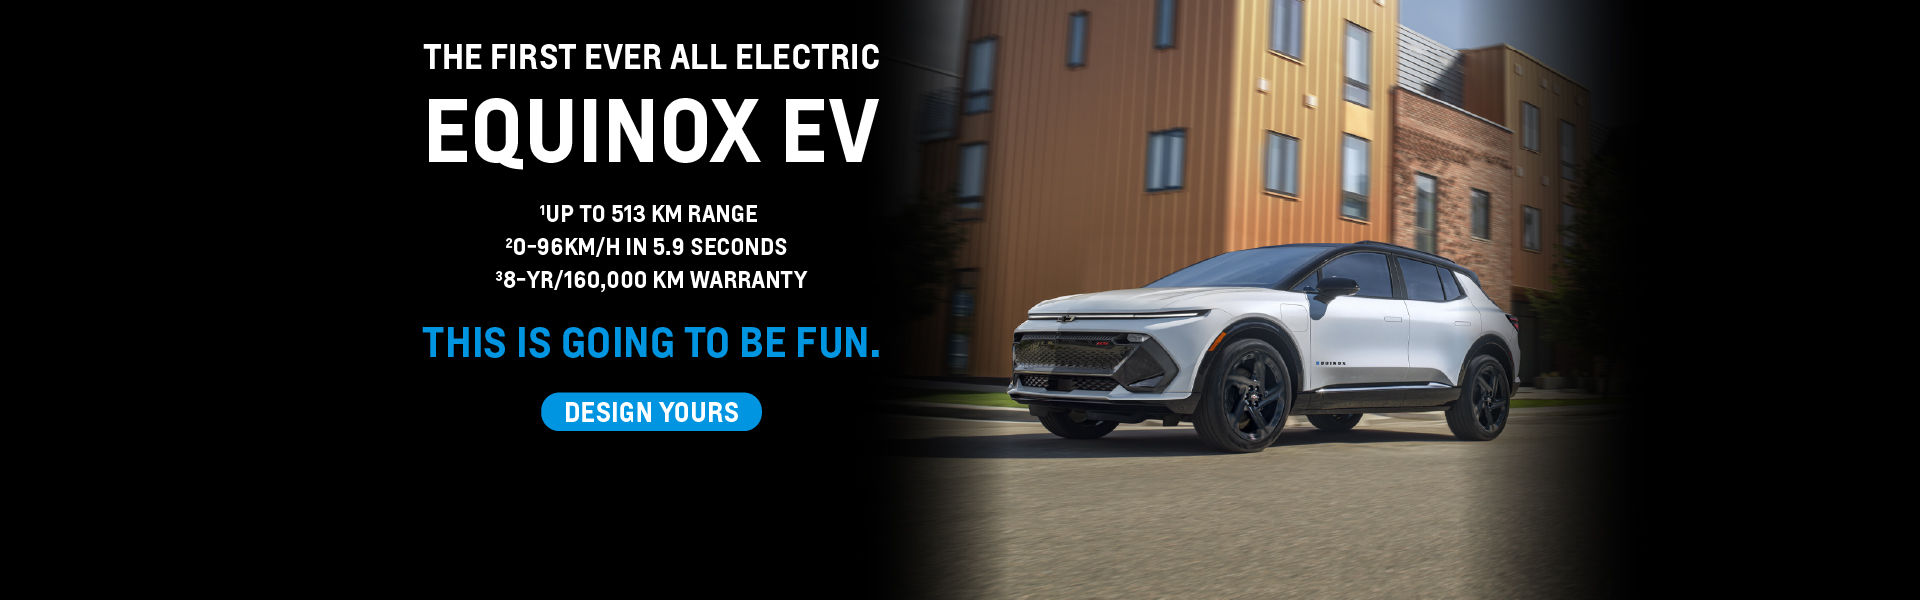 THE FIRST EVER ALL ELECTRIC EQUINOX EV’